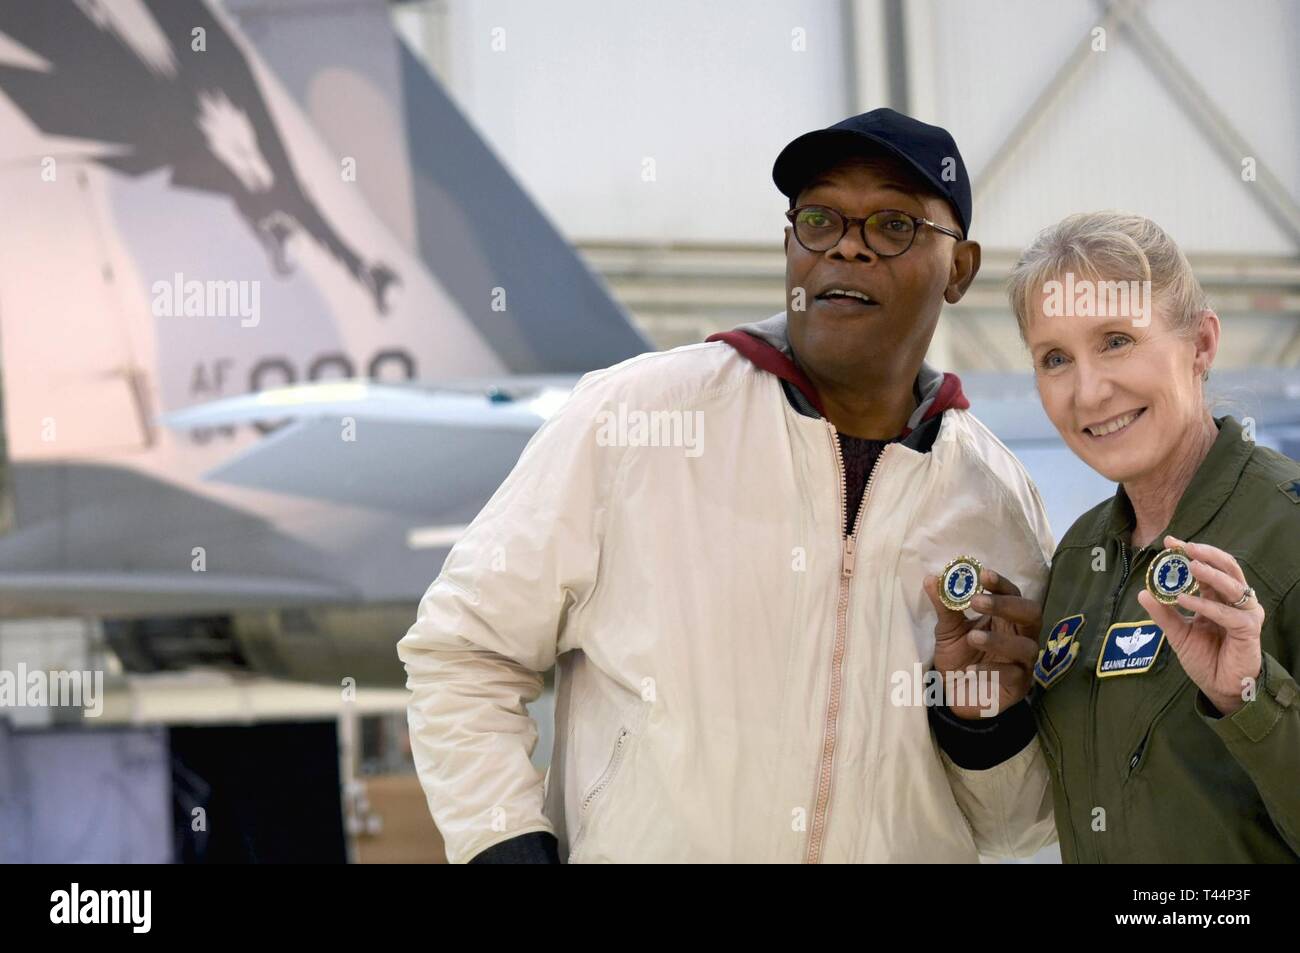 Actor Samuel L. Jackson poses with Gen. Jeannie Leavitt after receiving a challenge coin from her during a media event for 'Captain Marvel' at Edwards Air Force Base, California, Feb. 20, 2019. Leavitt, the first US Air Force female fighter, was a consultant on the movie, and Jackson reprised his Nick Fury role. Stock Photo